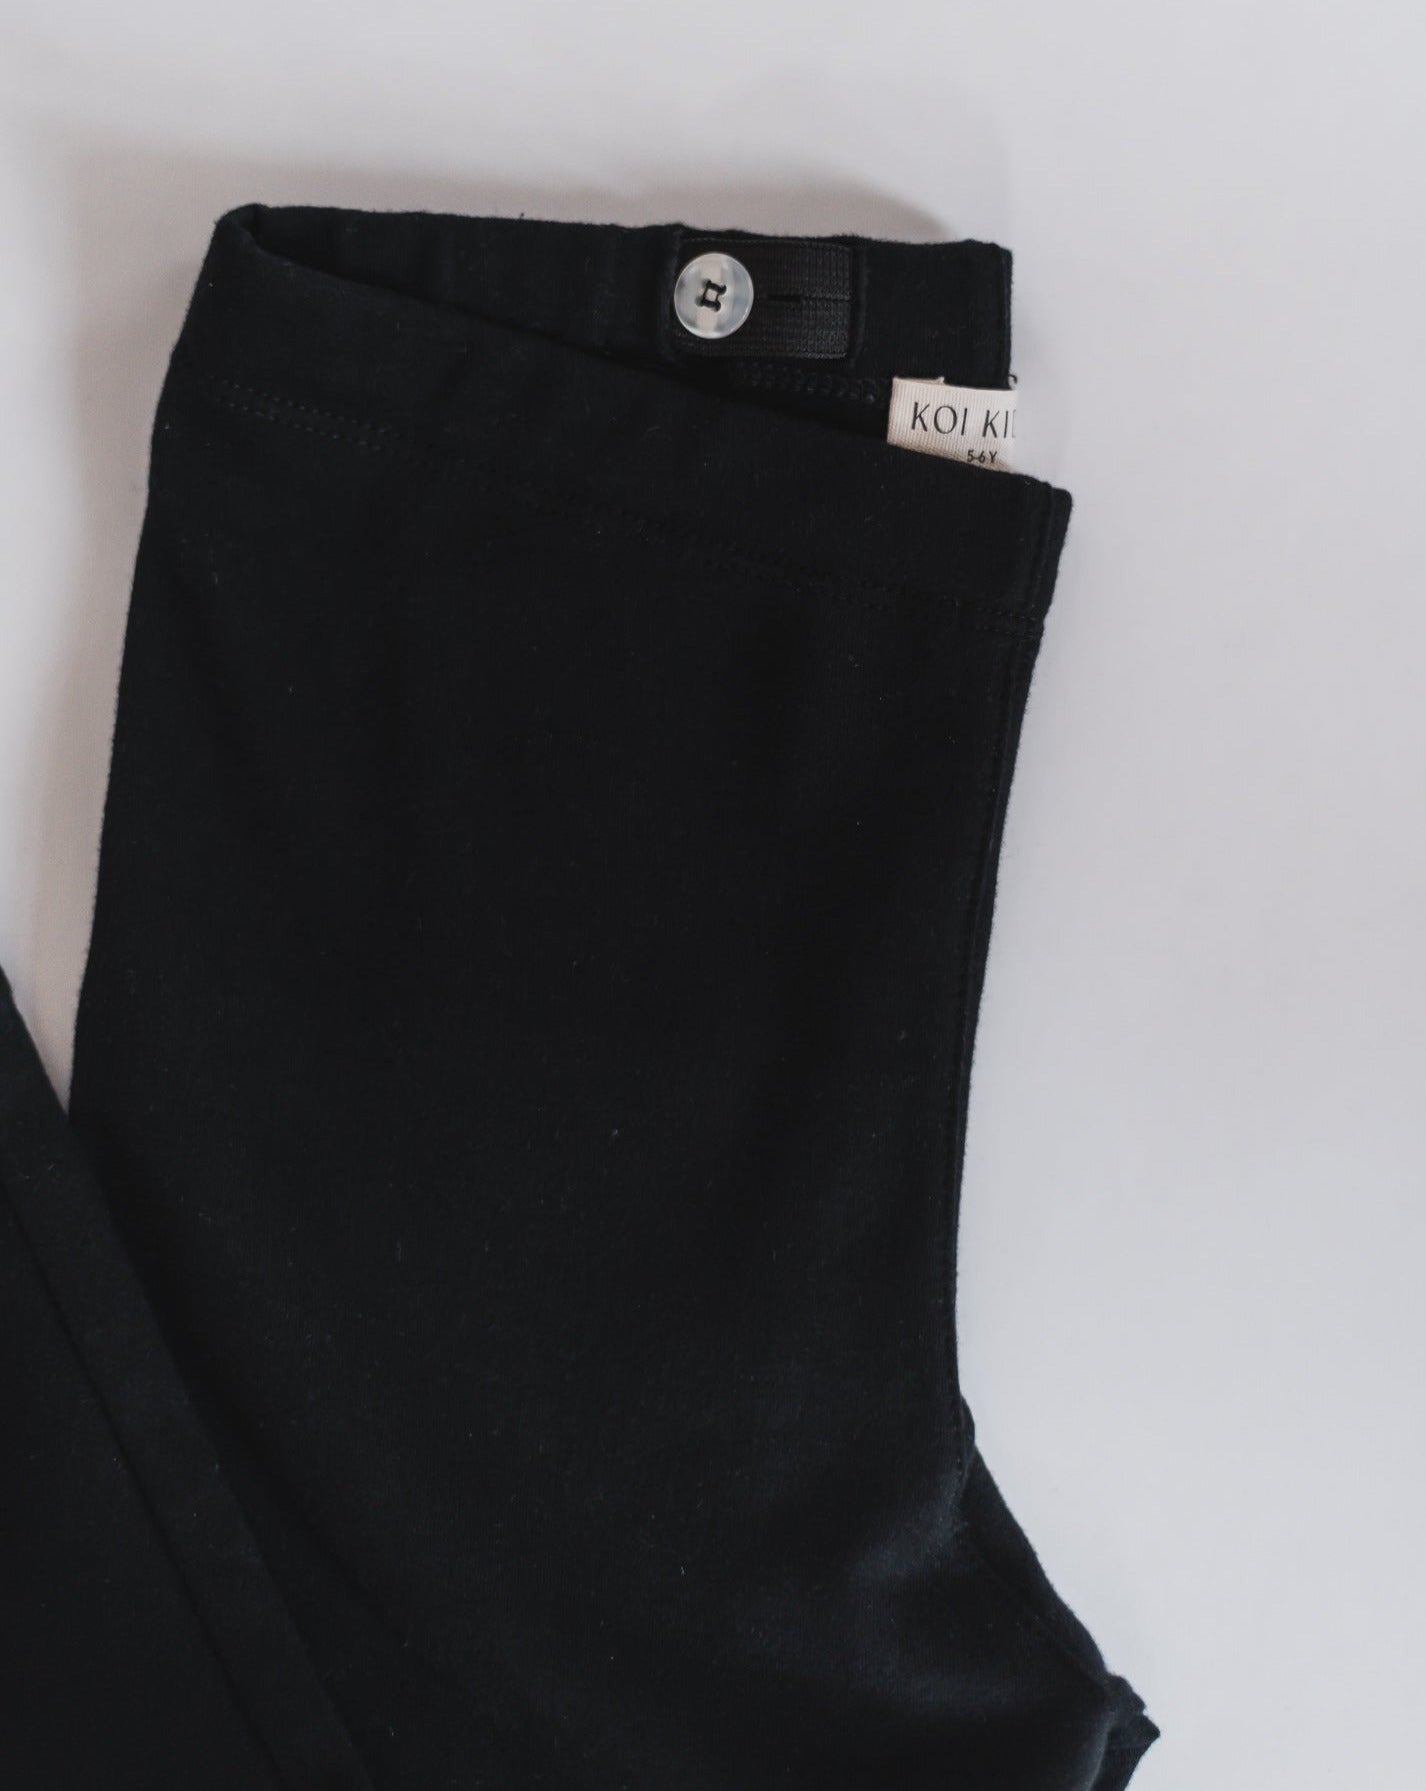 Leggings made from 100% GOTS certified organic cotton in black, with Koi fish cotton badge at back pocket. Elastic adjustable waist, foldable cuffs at the bottom of the legs.